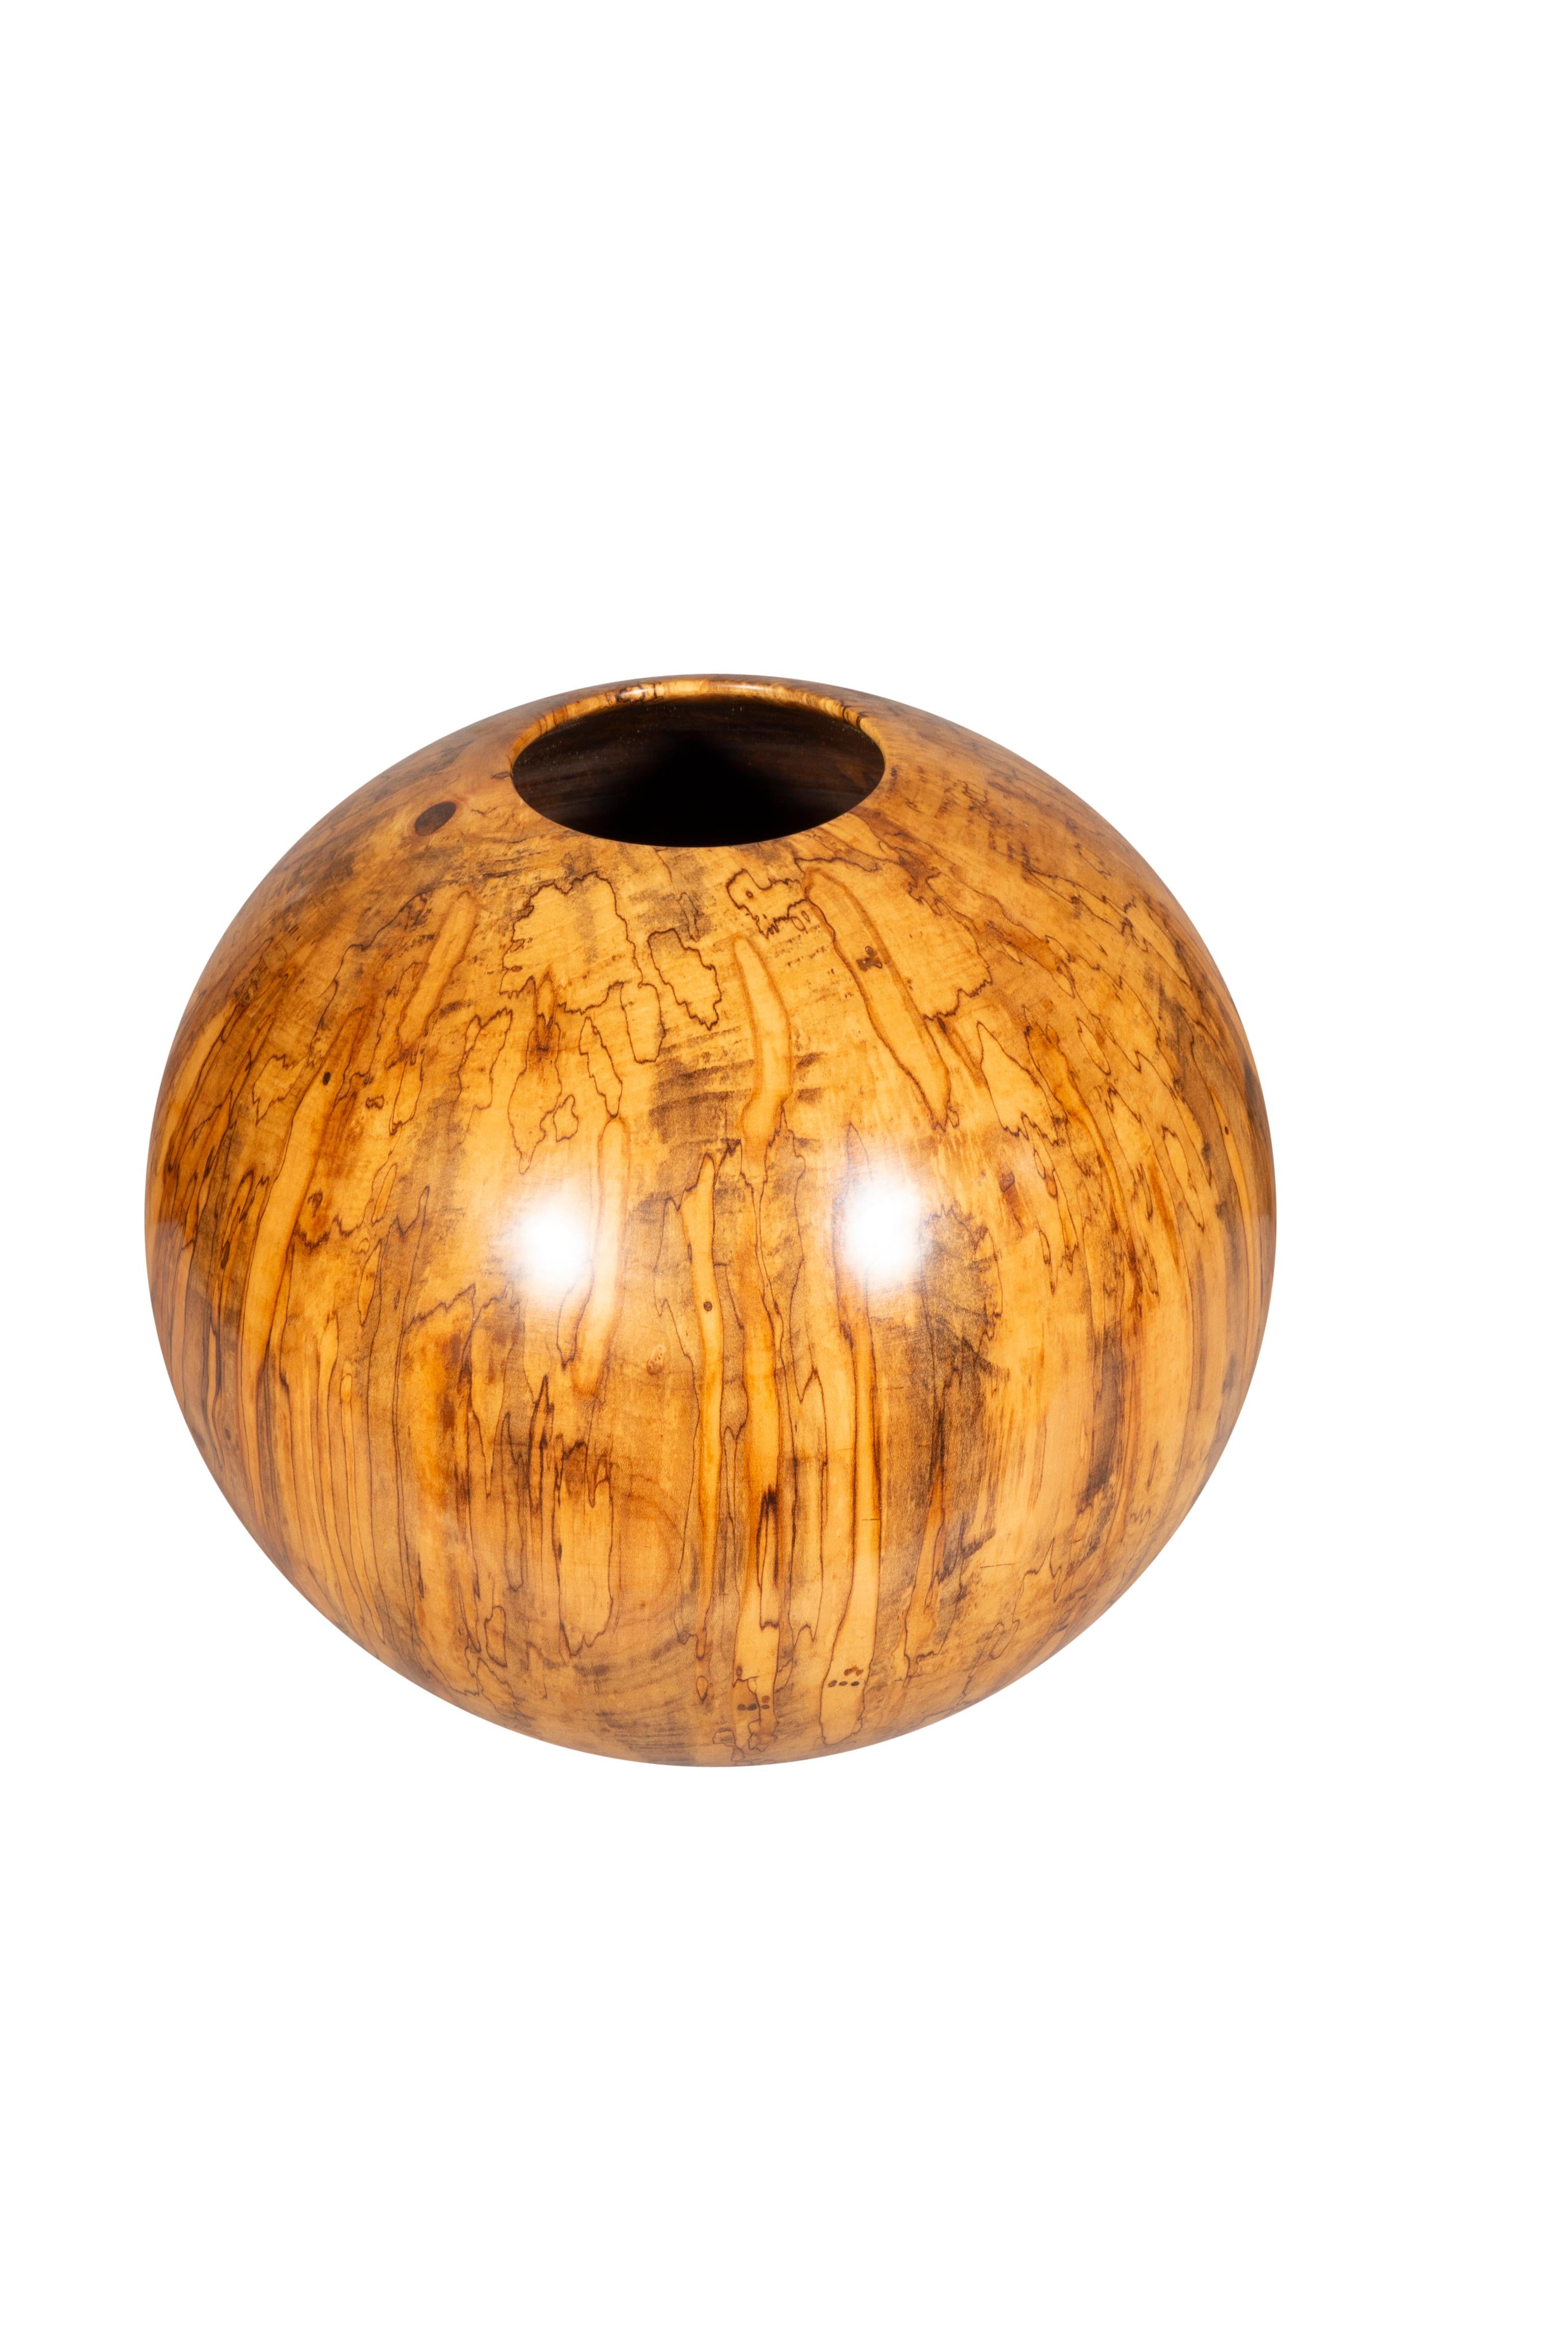 American Philip Moulthrop Spalted Silver Maple Vase For Sale